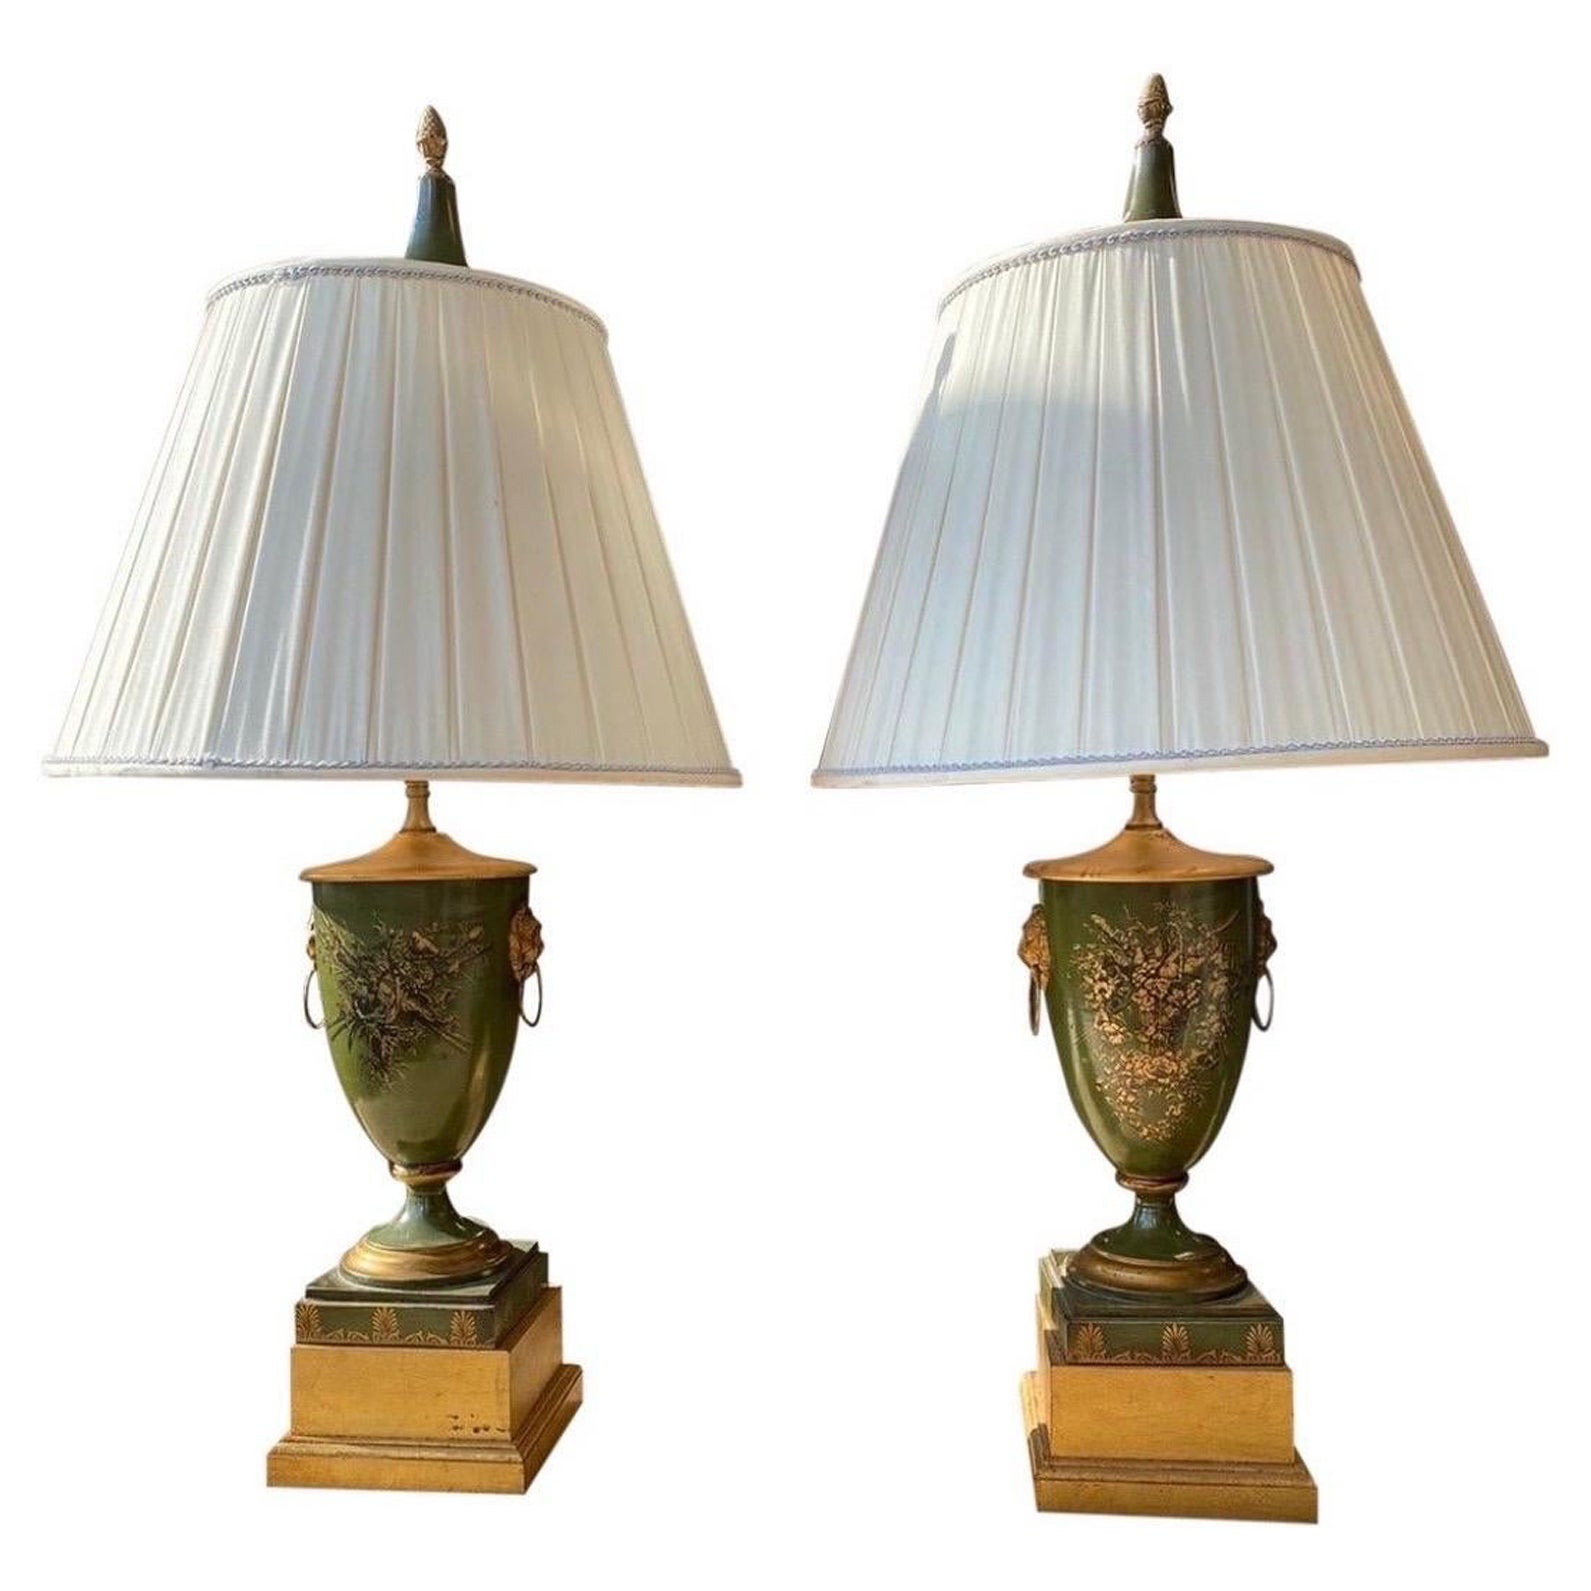 Vintage French Tole Hunting Urns Converted Into Table Lamps - a Pair For Sale